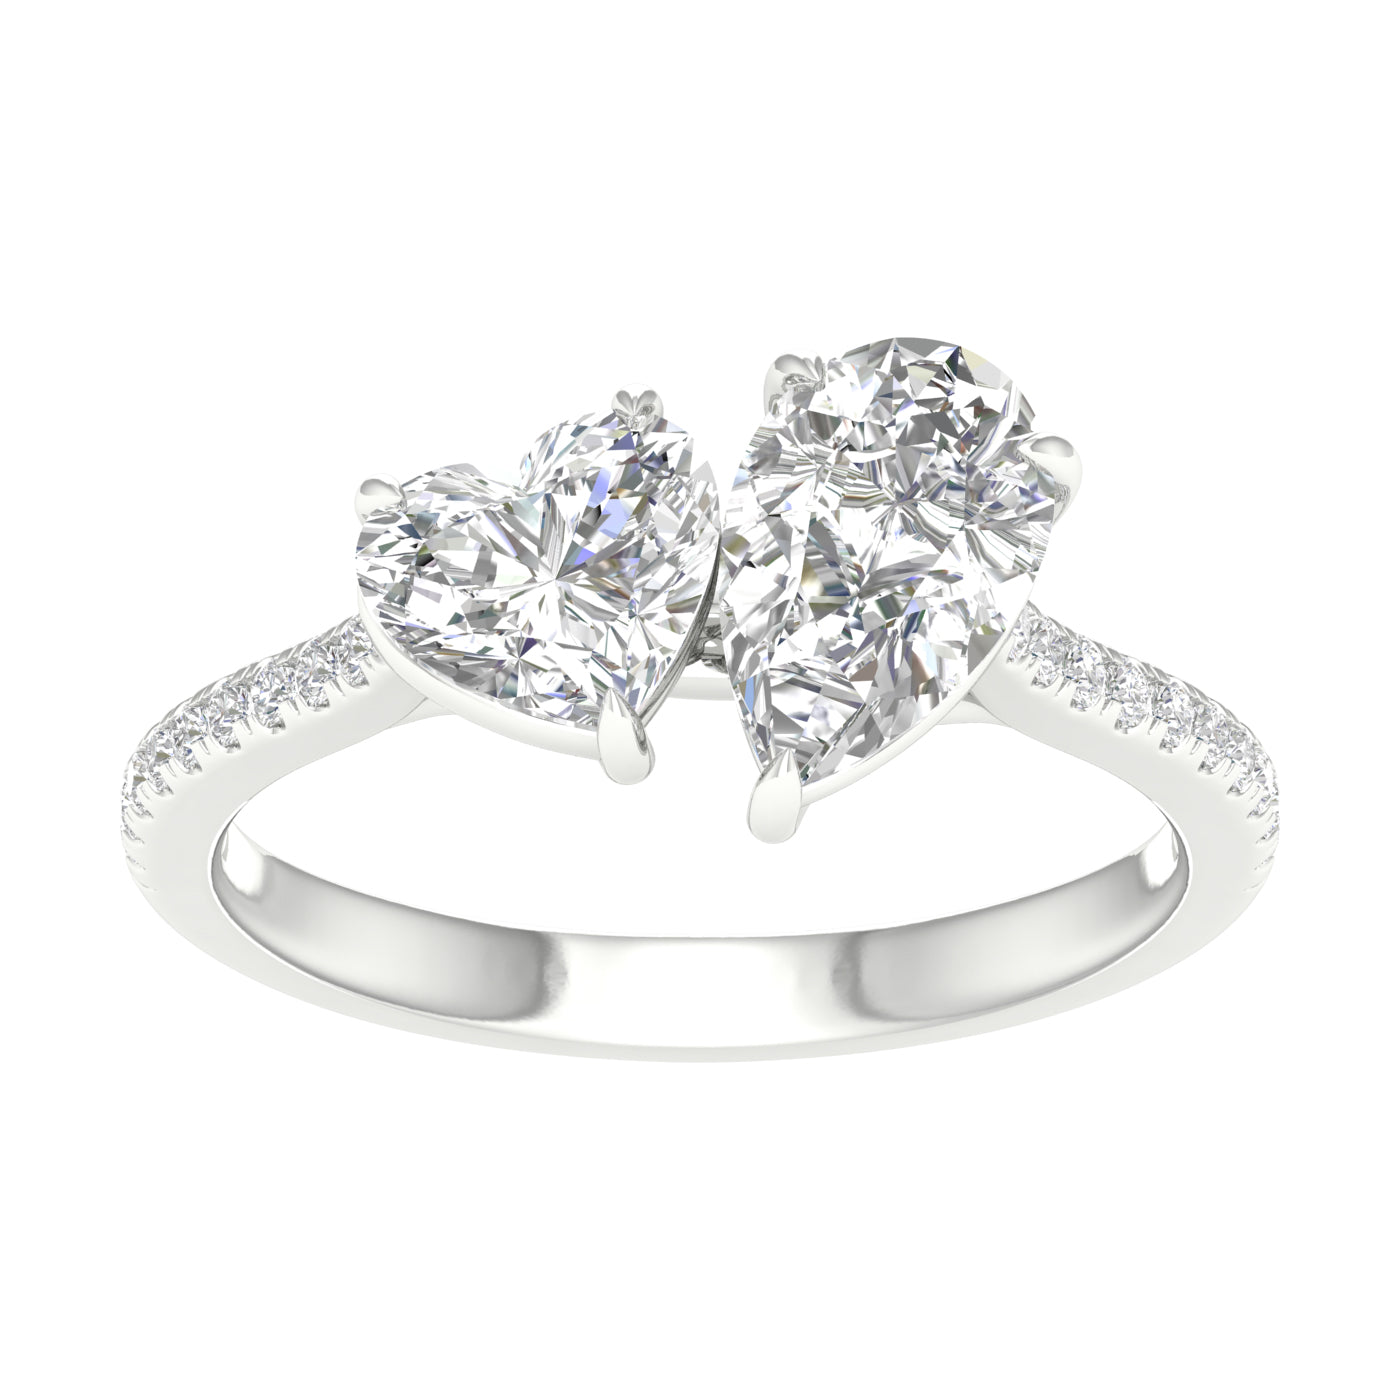 Atmos Heart Pear Two Stone Diamond Ring_Product Angle_PCP Main Image